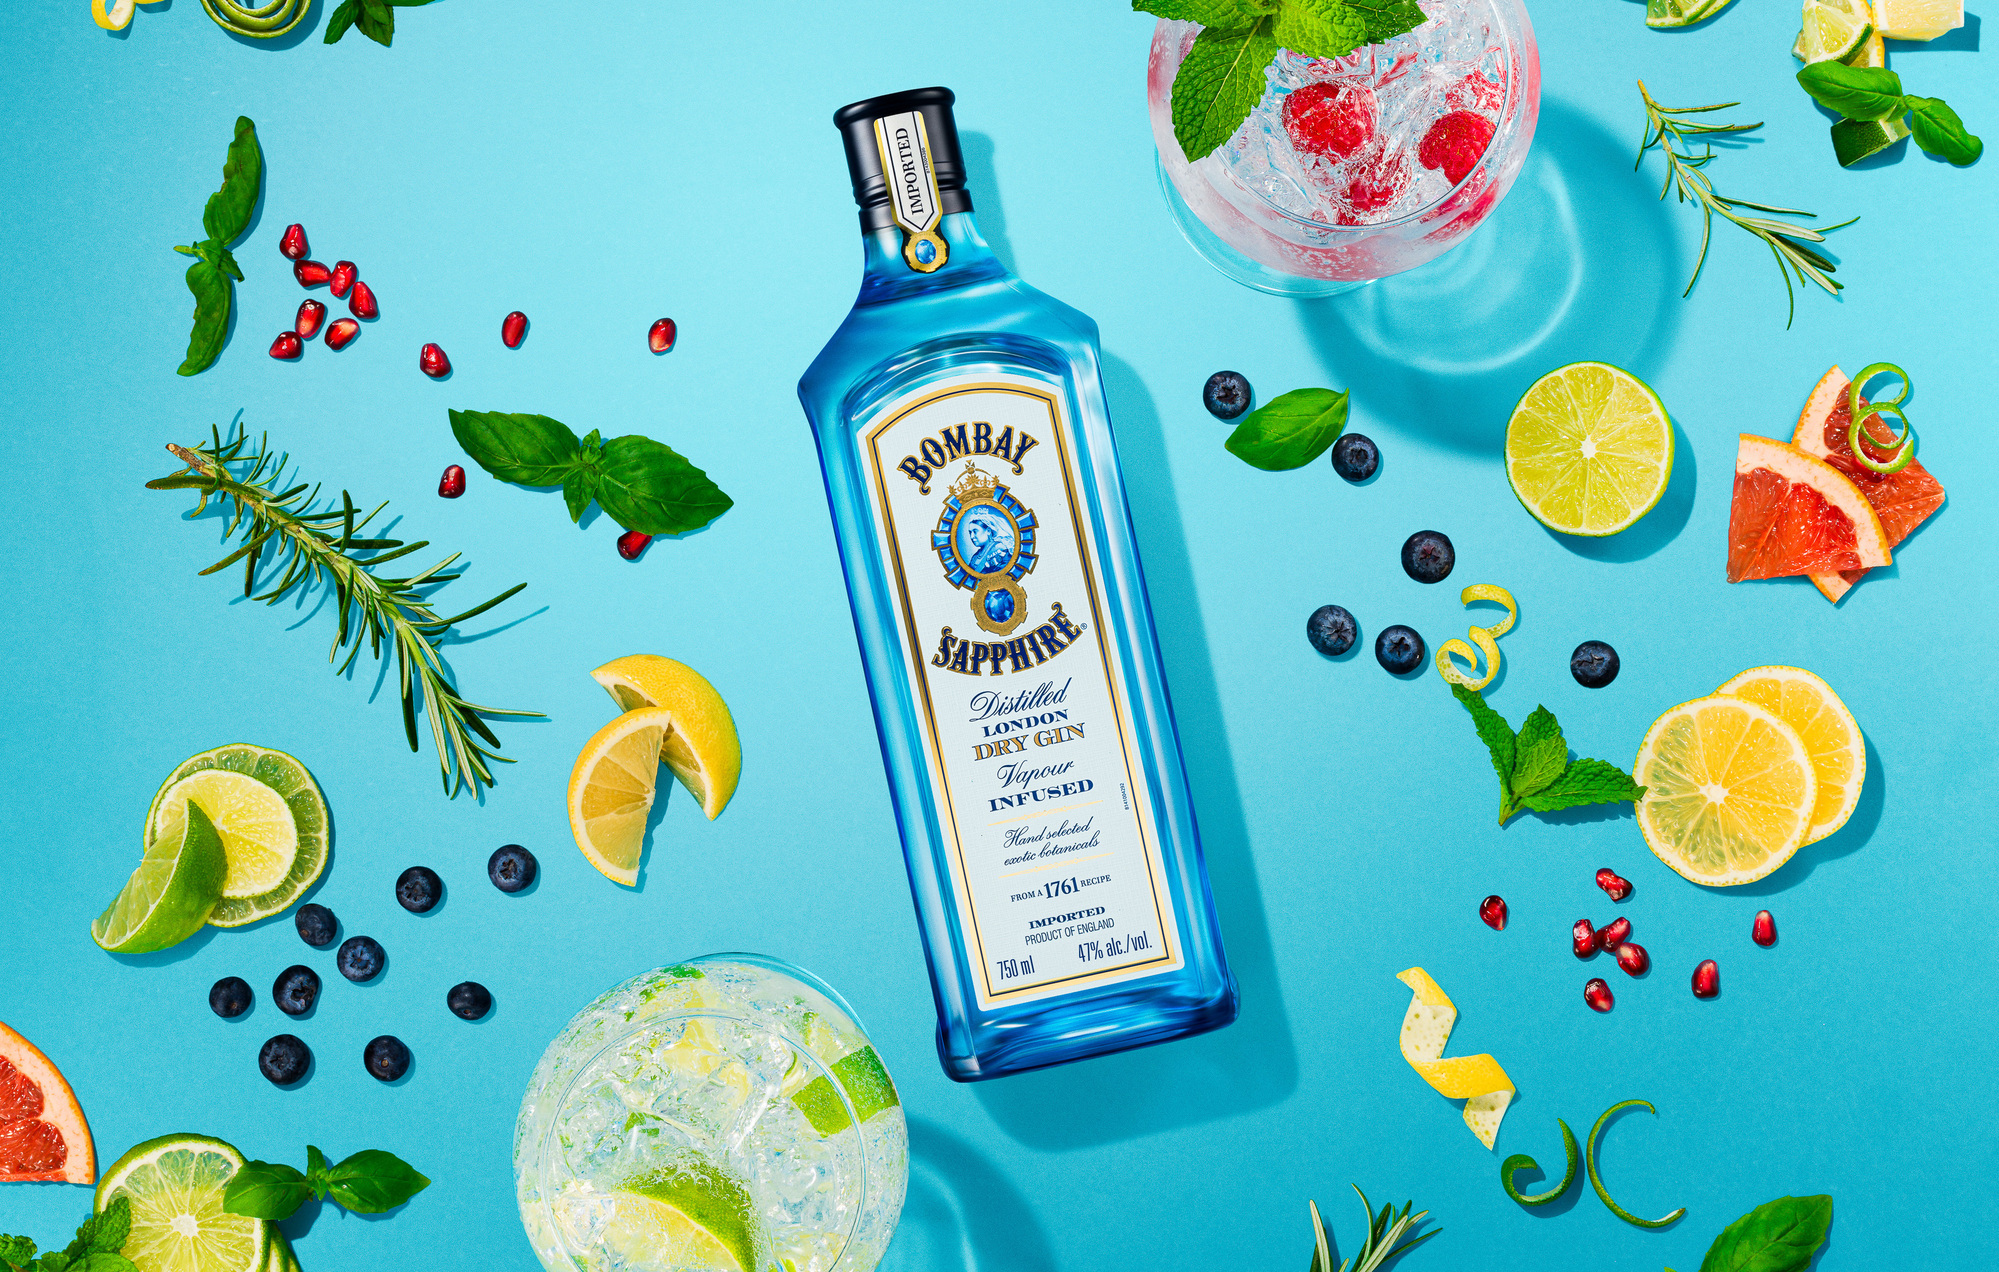 Bombay Sapphire gin bottle and cocktails. Beverage product and advertising photography by Timothy Hogan in Los Angeles